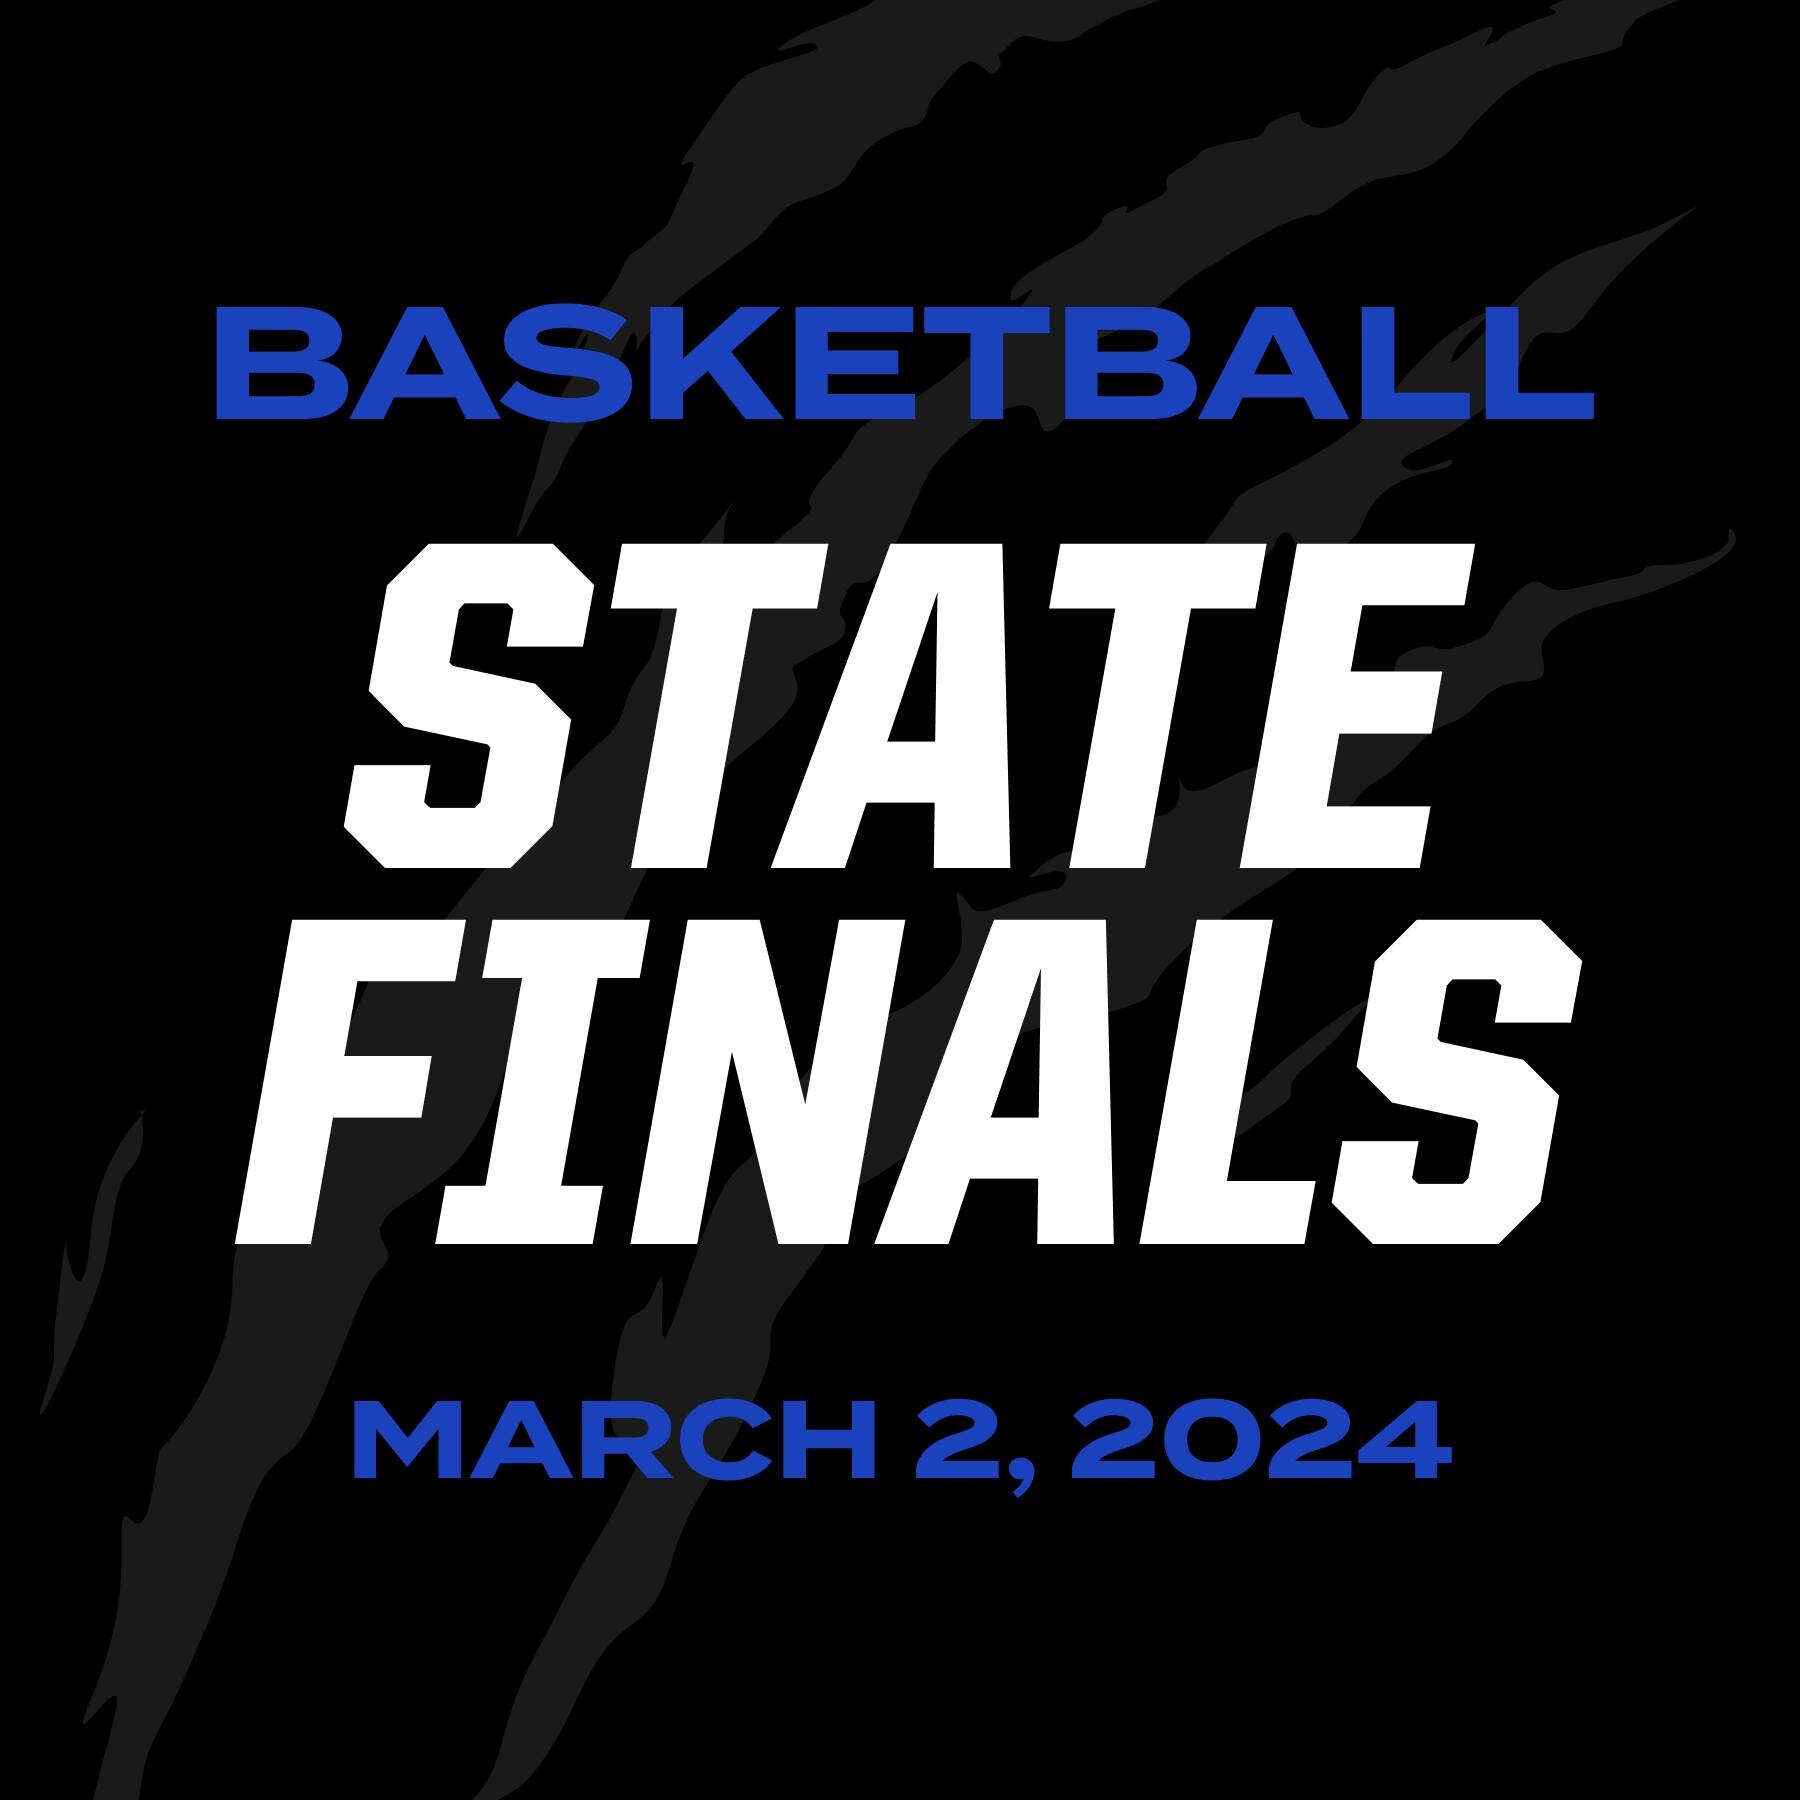 CONGRATS TO THE TEAMS THAT ADVANCED TO THE MICHIGAN HOMESCHOOL BASKETBALL STATE FINALS!

Let's show the state how well Cougar Nation shows up by heading to Carson City Crystal HS this Saturday, March 2, 2024! The WMHFA Pep Band will be playing during